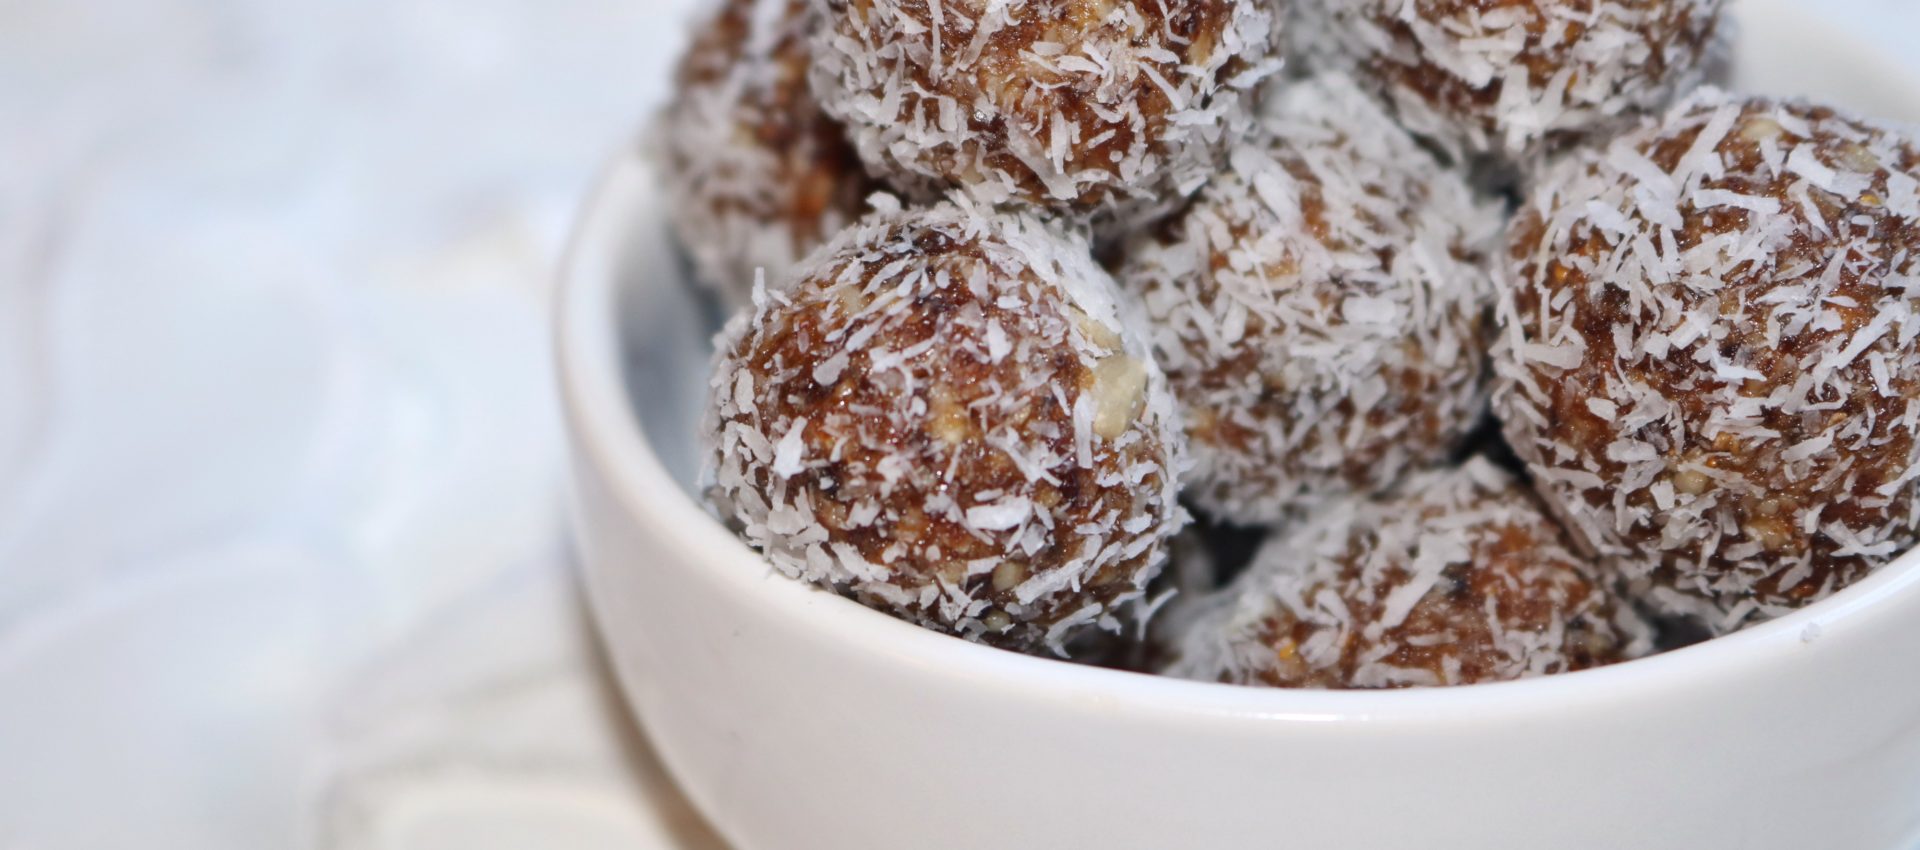 Image of Coconut Date Energy Balls.